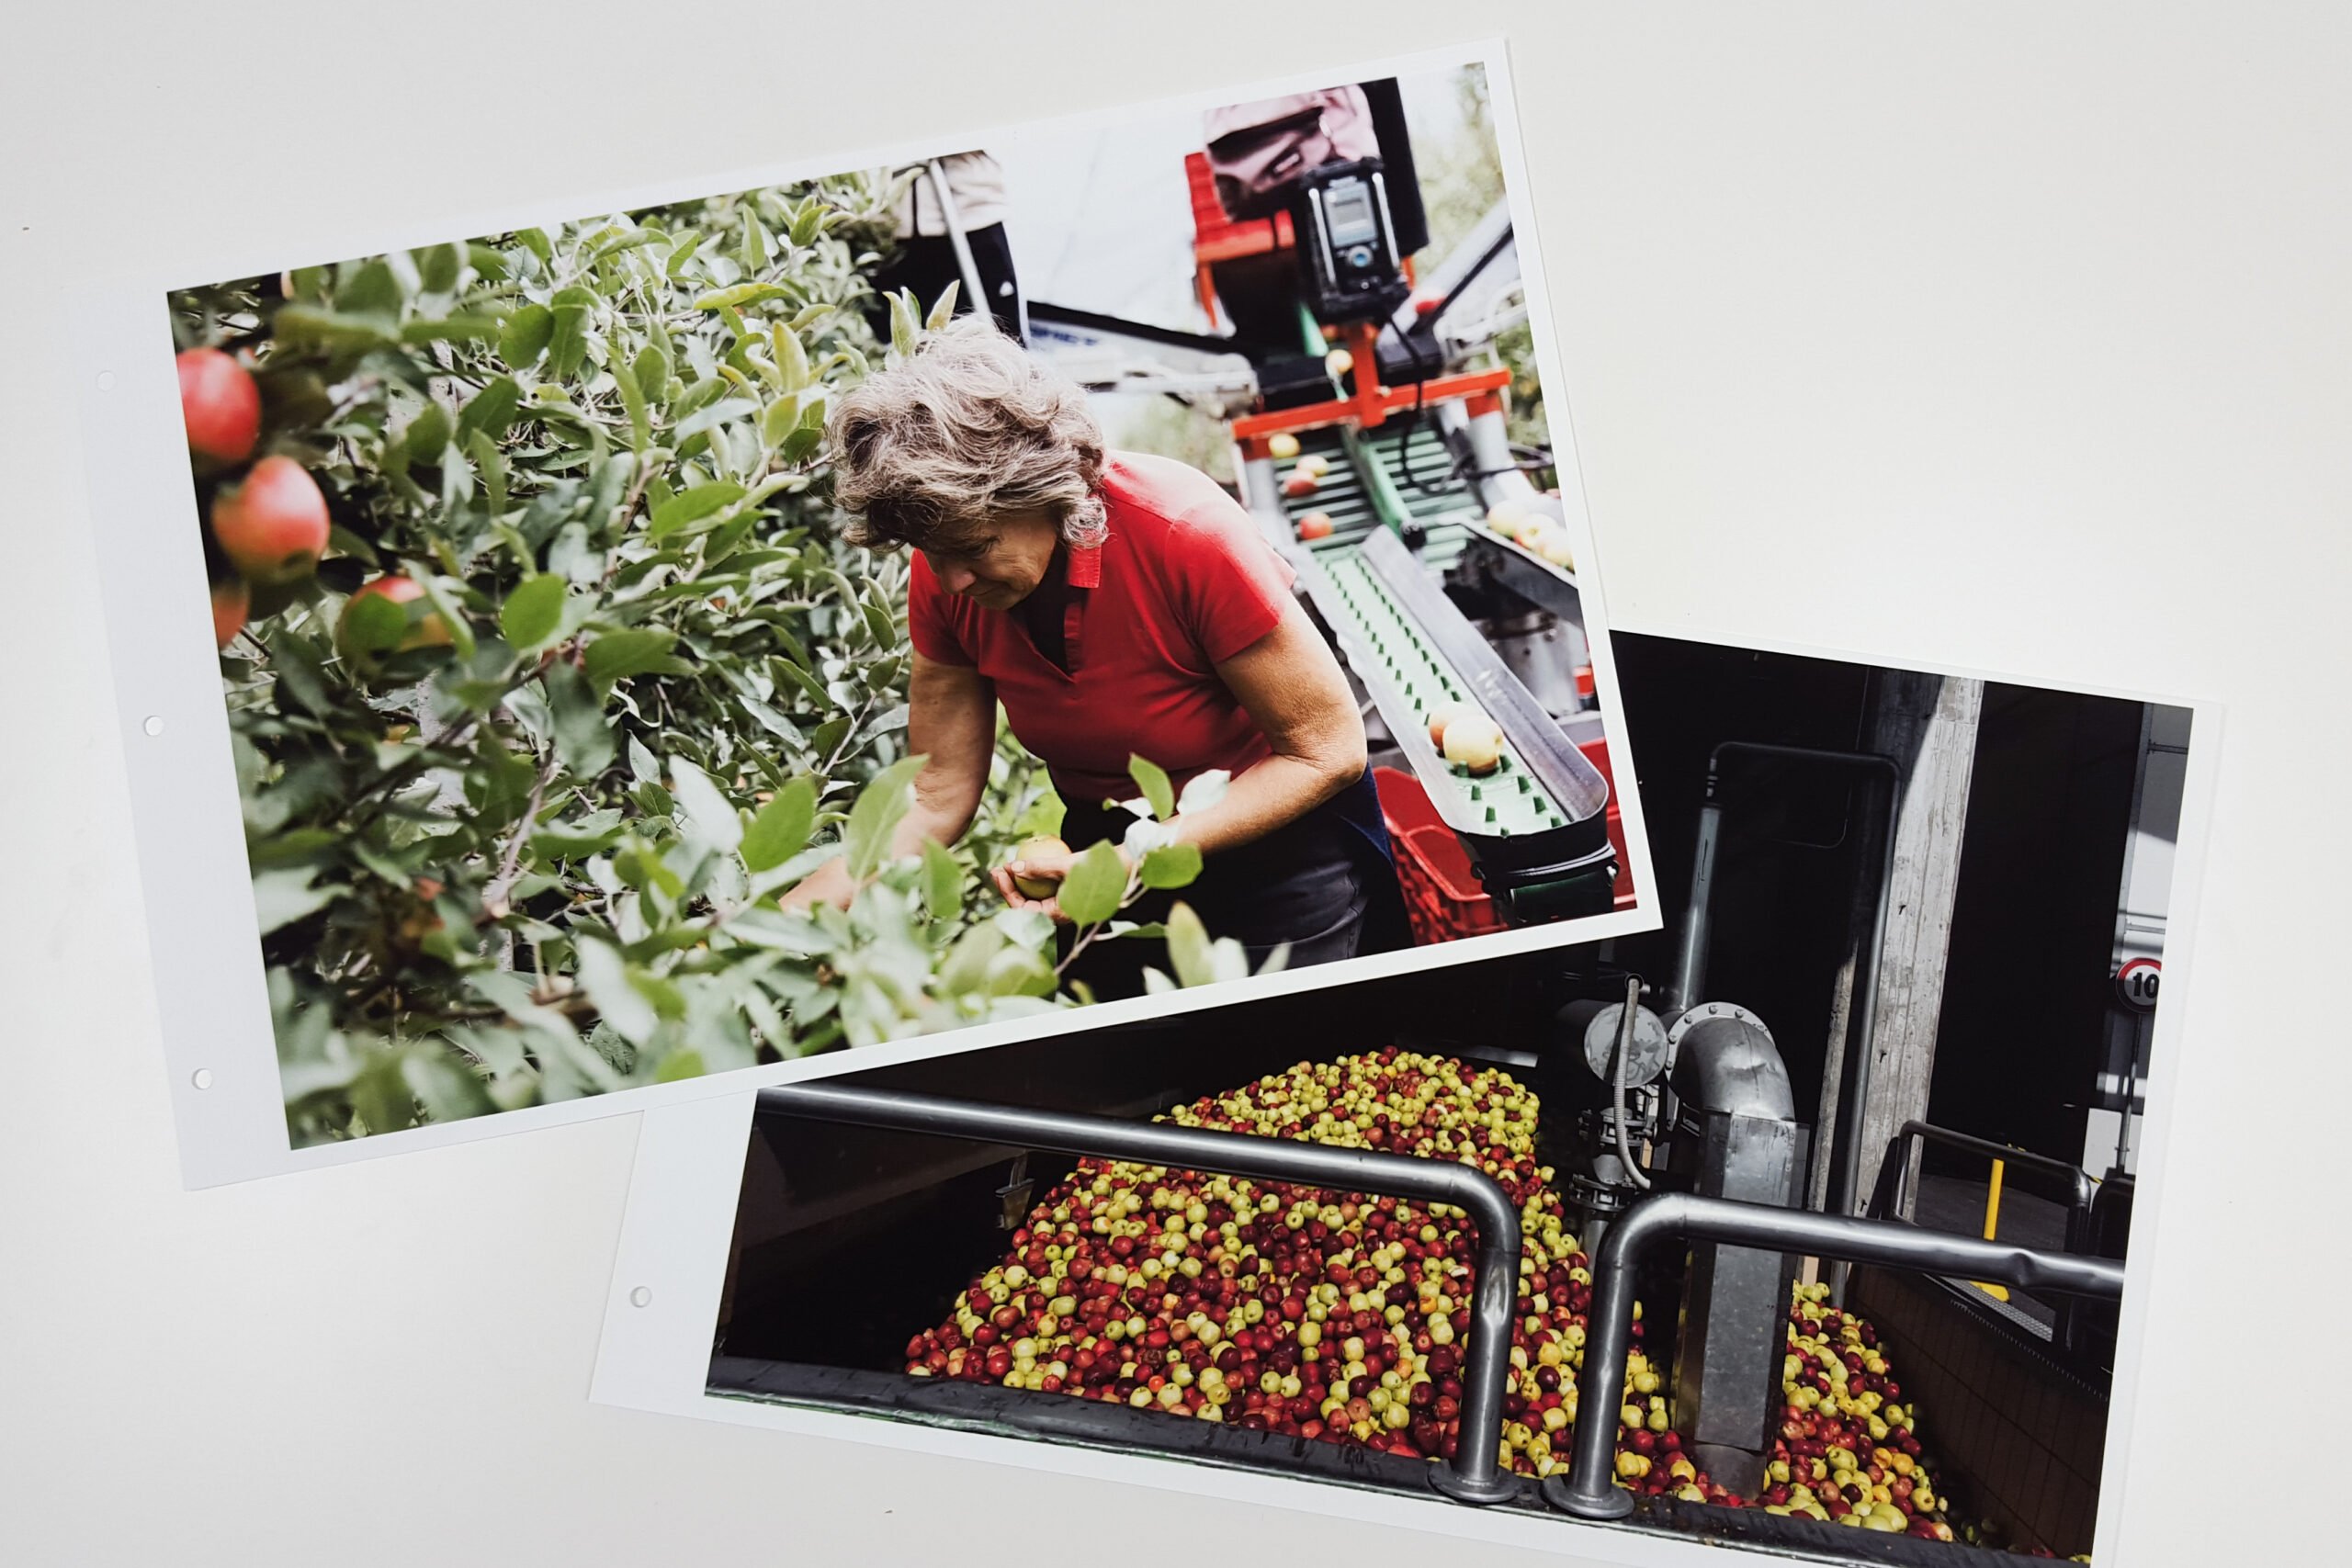 An image of two photo prints. One is of a woman harvesting apples followed by a machine. The other is apple processing on a large scale by machine.